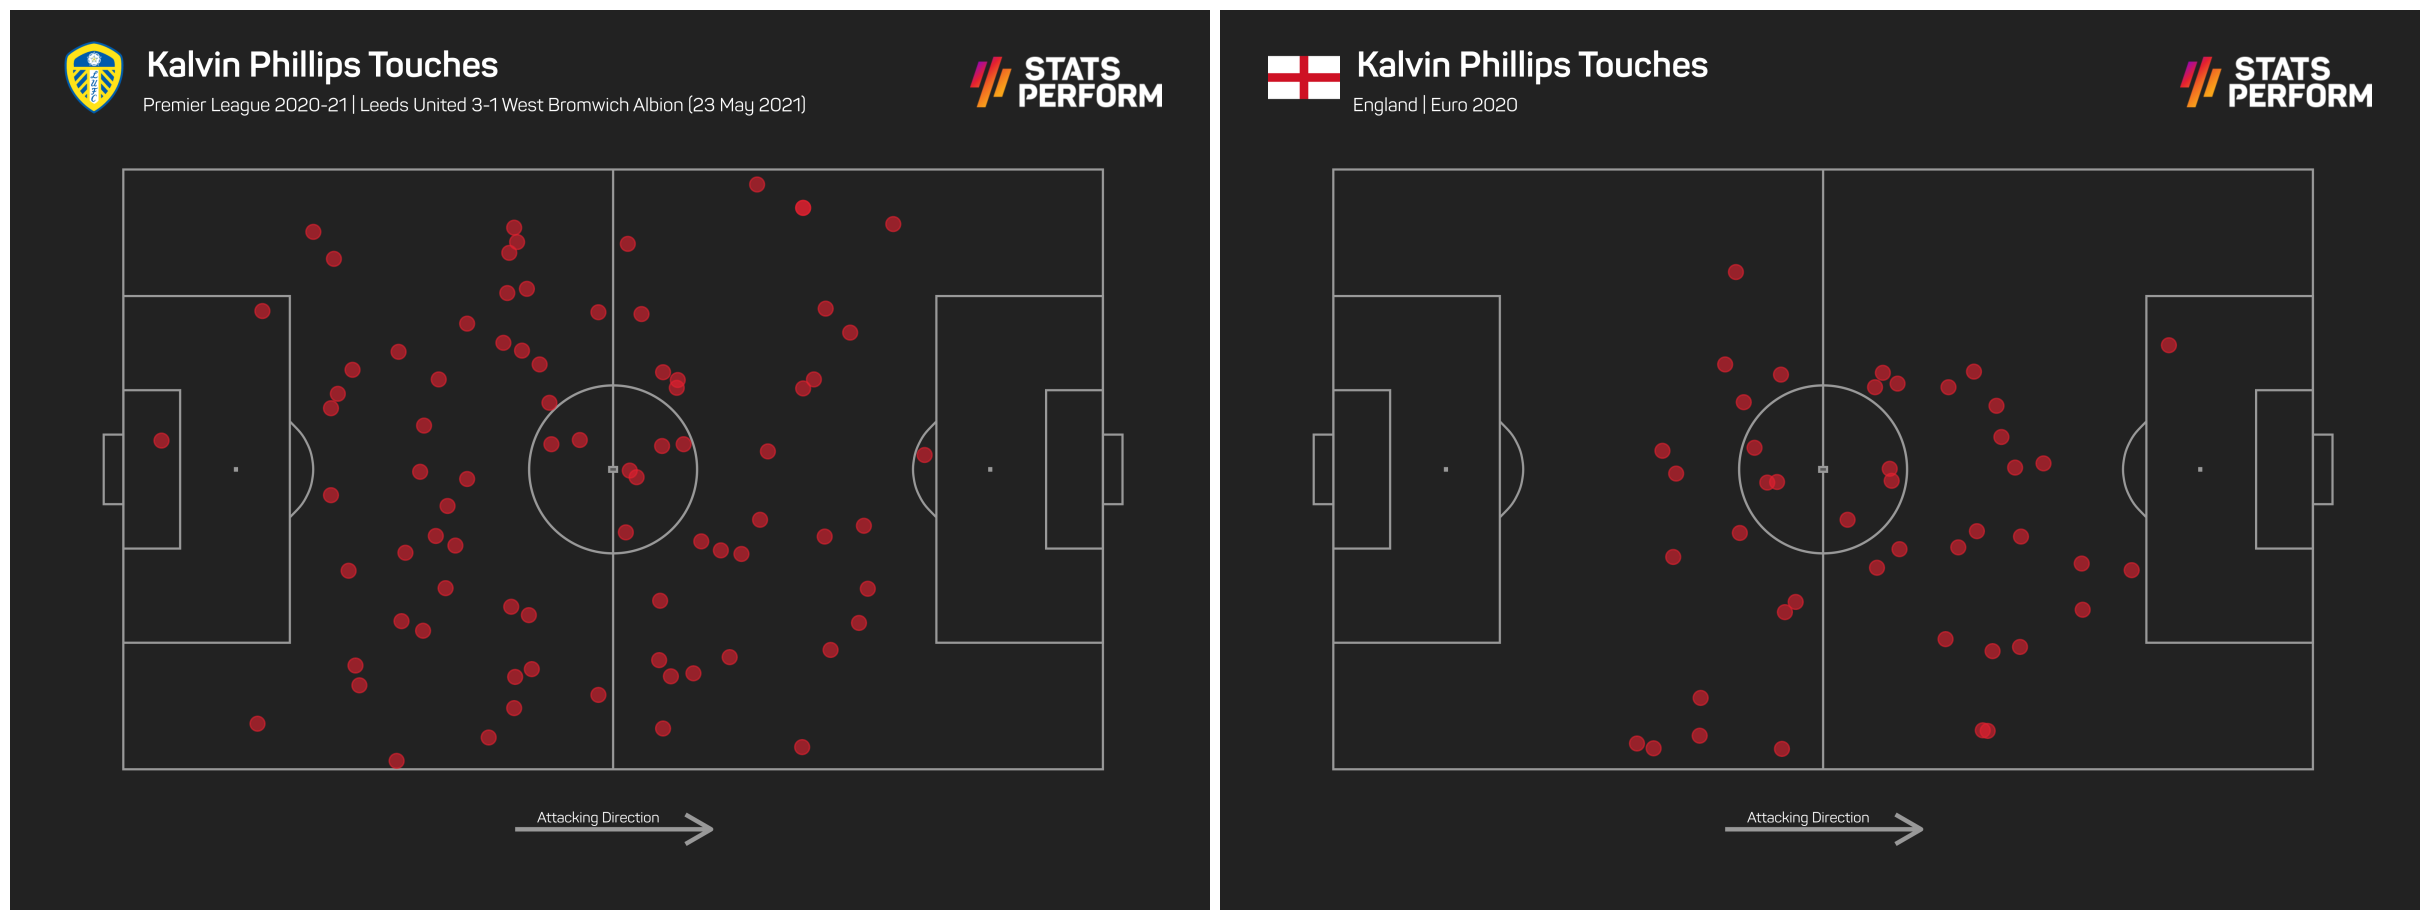 Kalvin Phillips' touchmaps in action for Leeds and for England against Croatia highlight the difference in his role